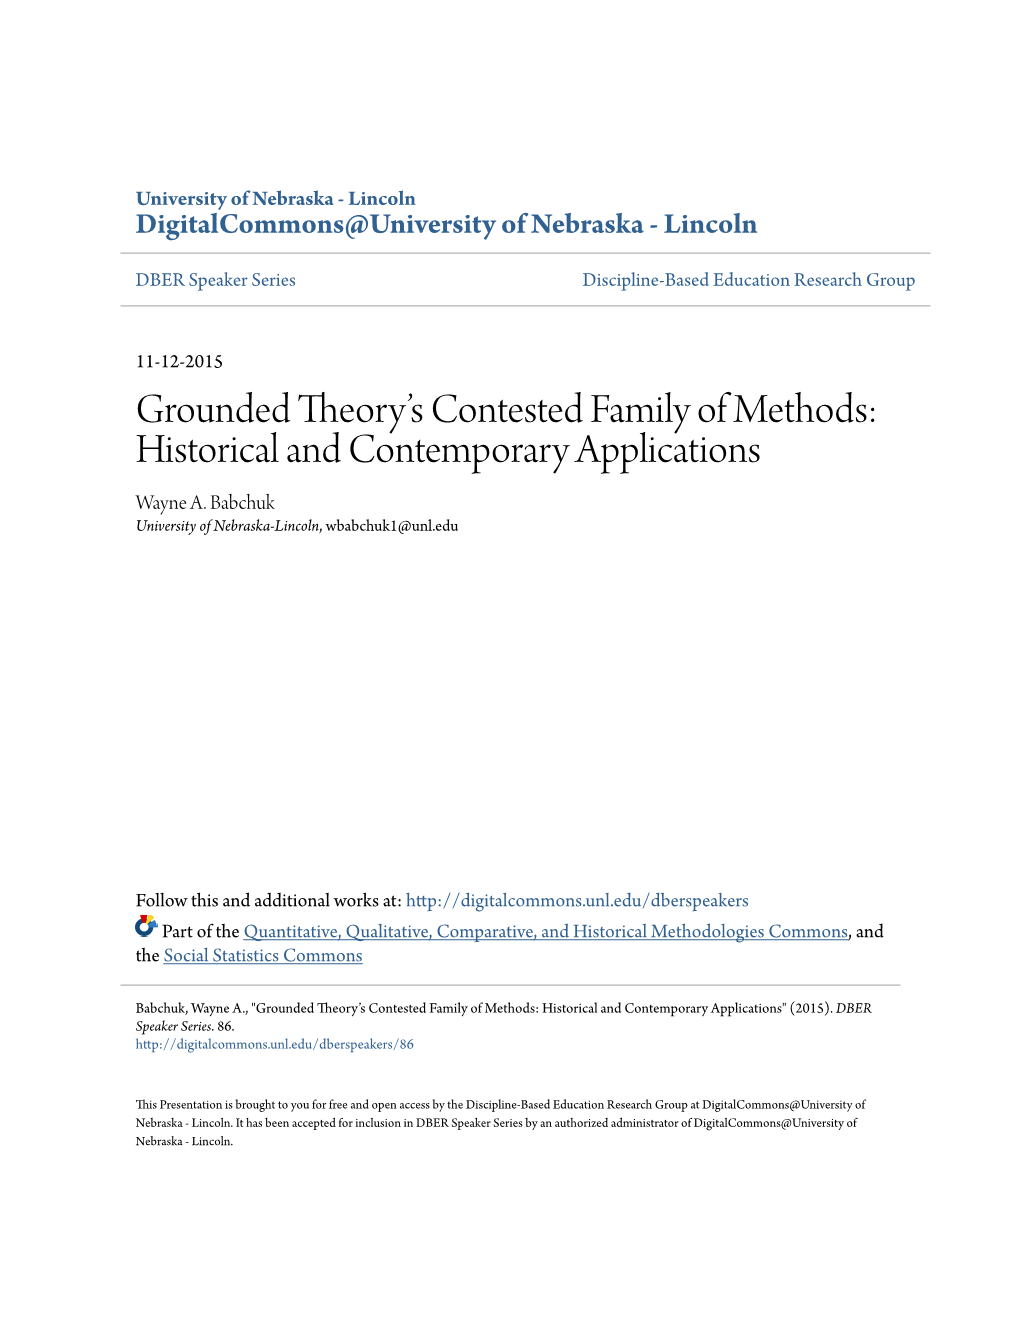 Grounded Theory’S Contested Family of Methods: Historical and Contemporary Applications Wayne A